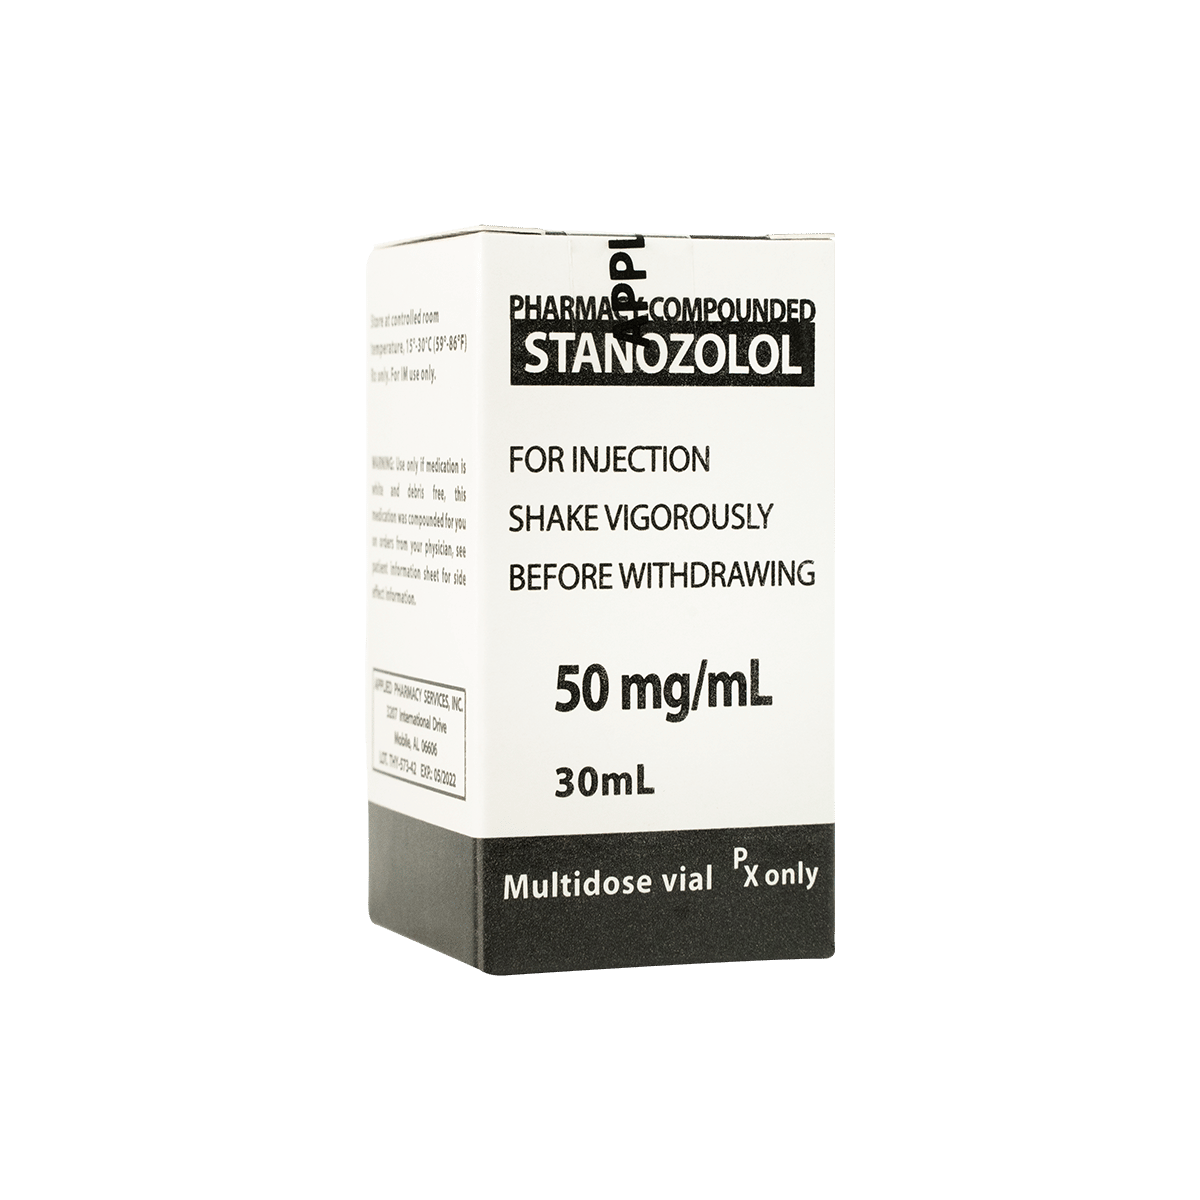 STANOZOLOL-Pharmacy-Compounded-Nucleus